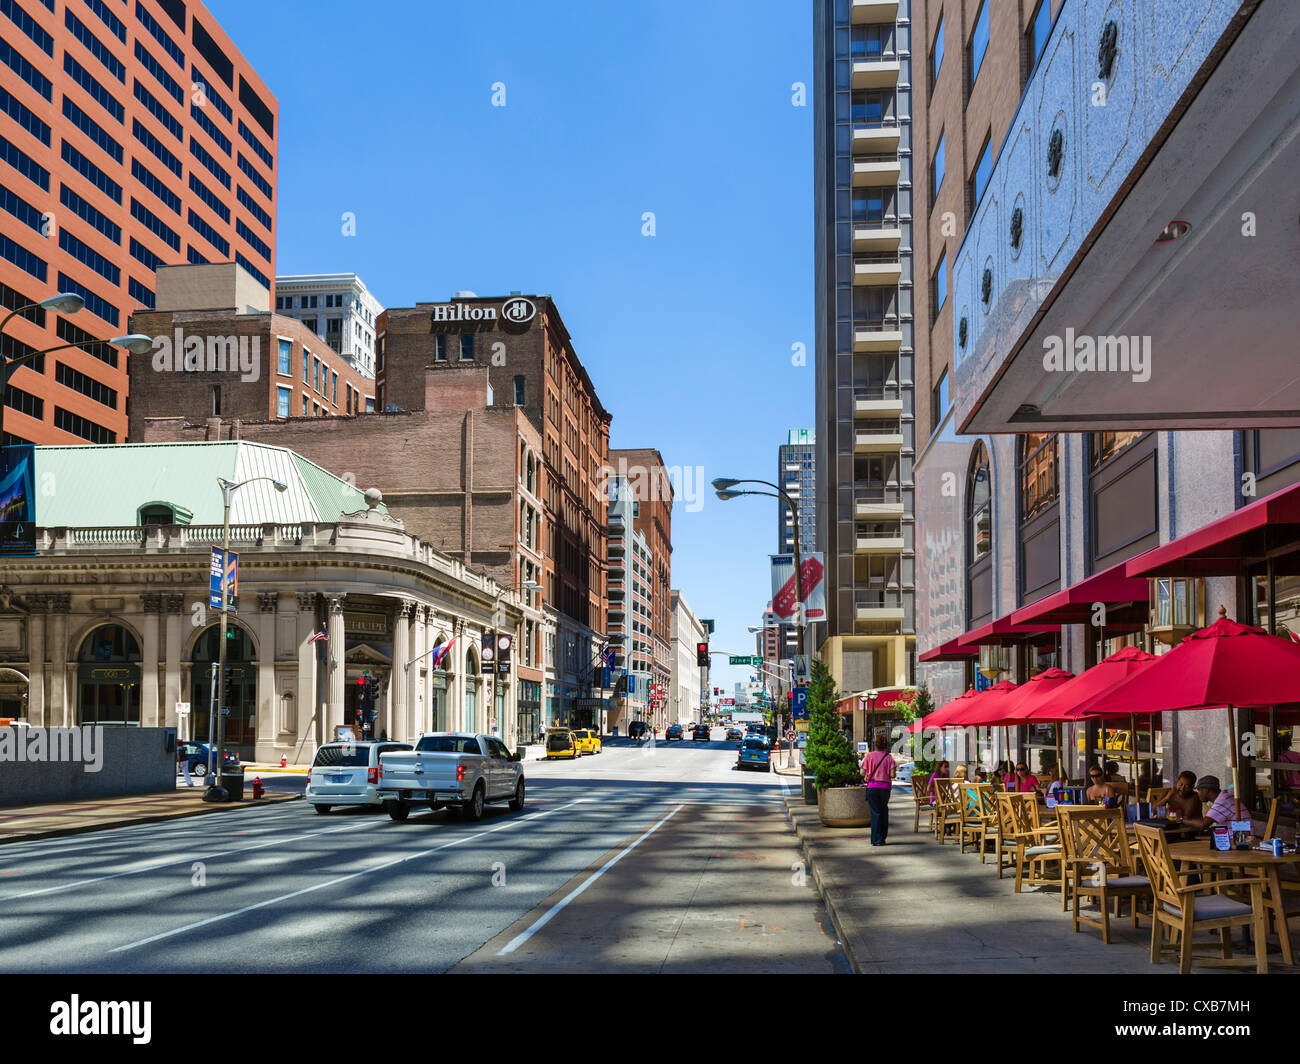 Hotels and stores on N 4th Street in downtown St Louis, Missouri, USA Stock Photo - Alamy